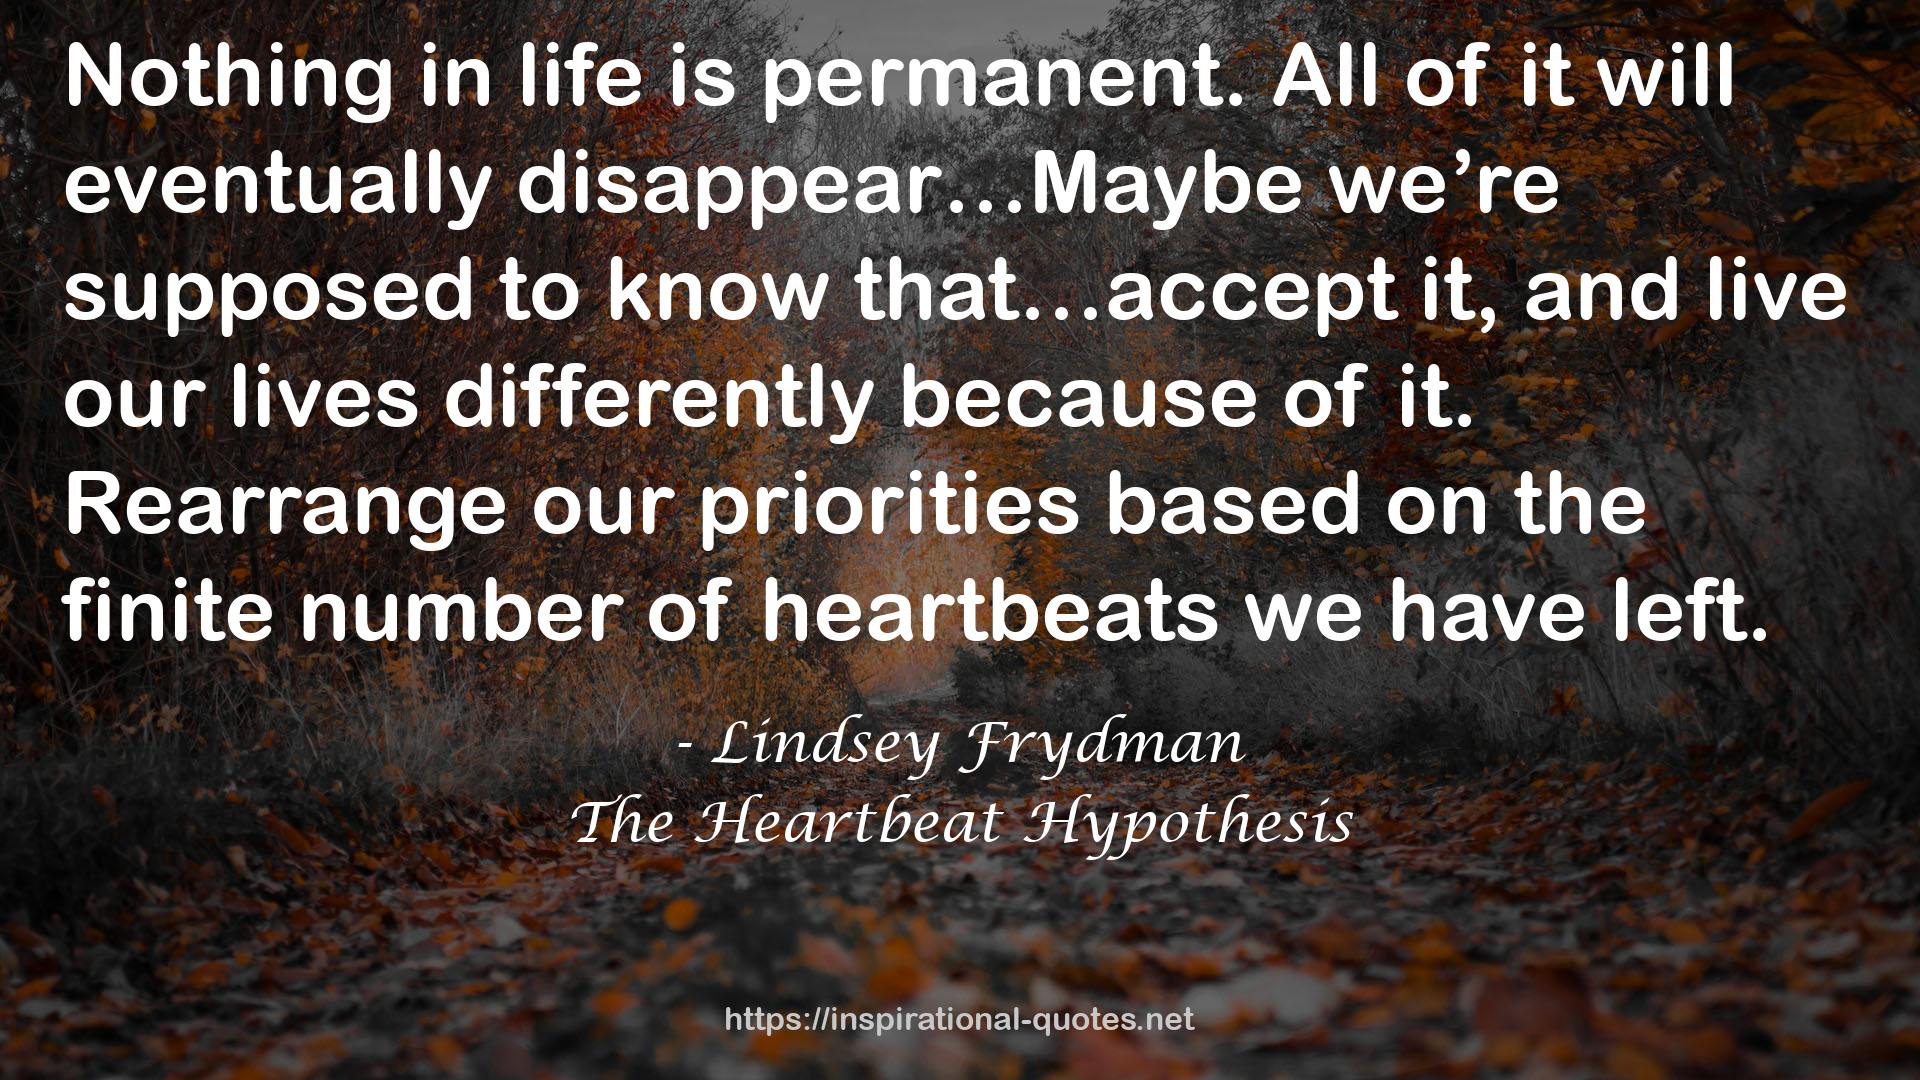 The Heartbeat Hypothesis QUOTES